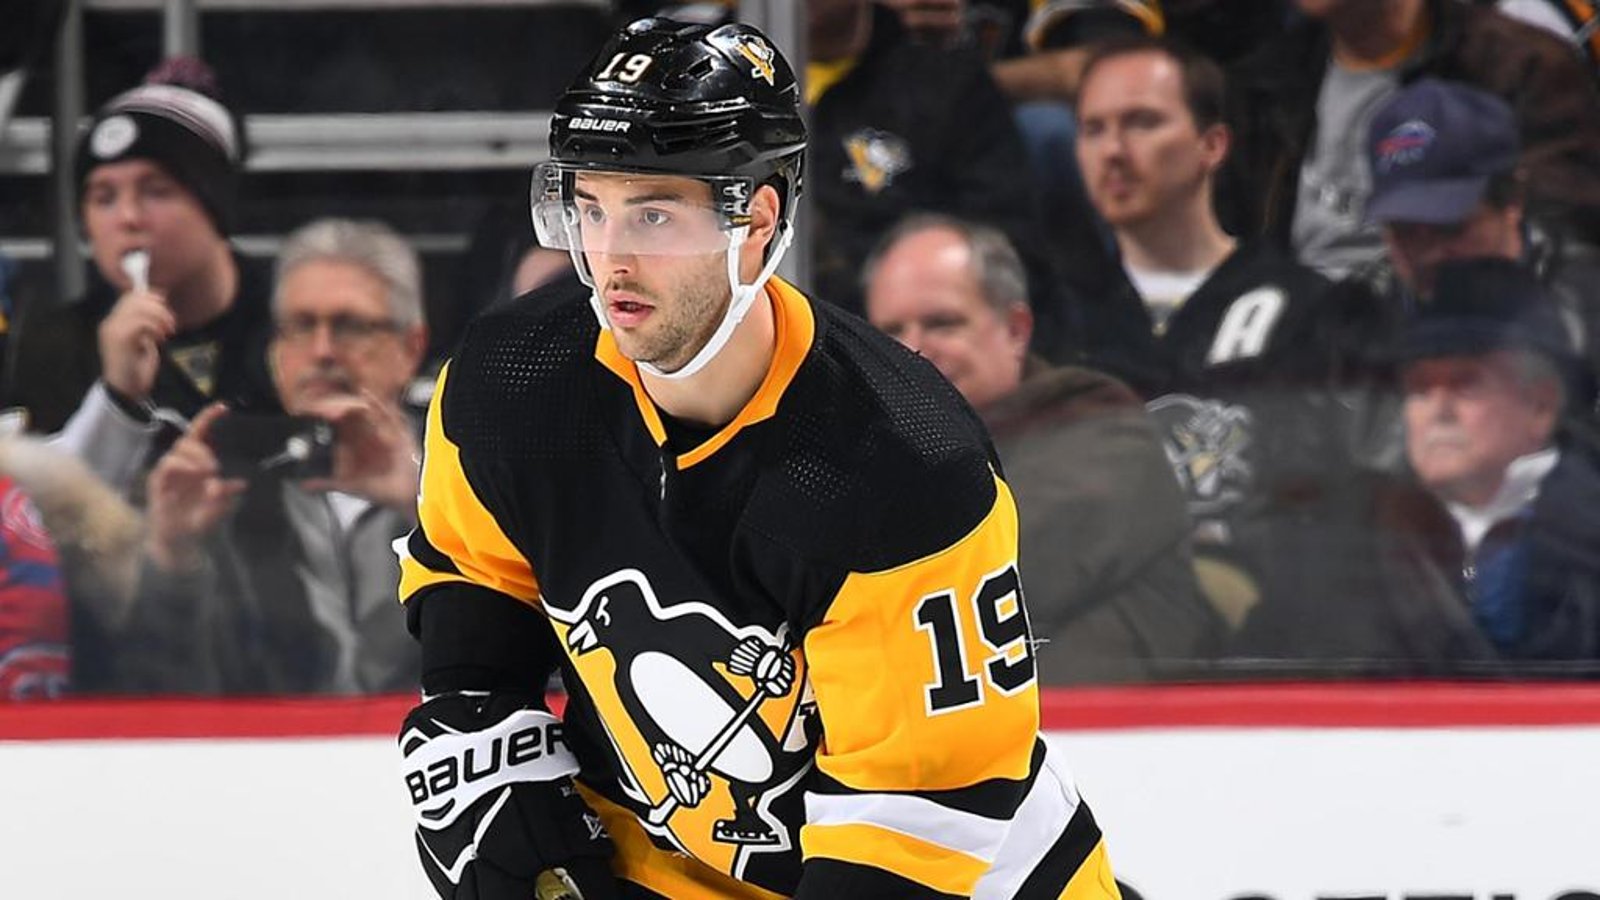 Breaking: Brassard has been traded as part of a bigger deal! 